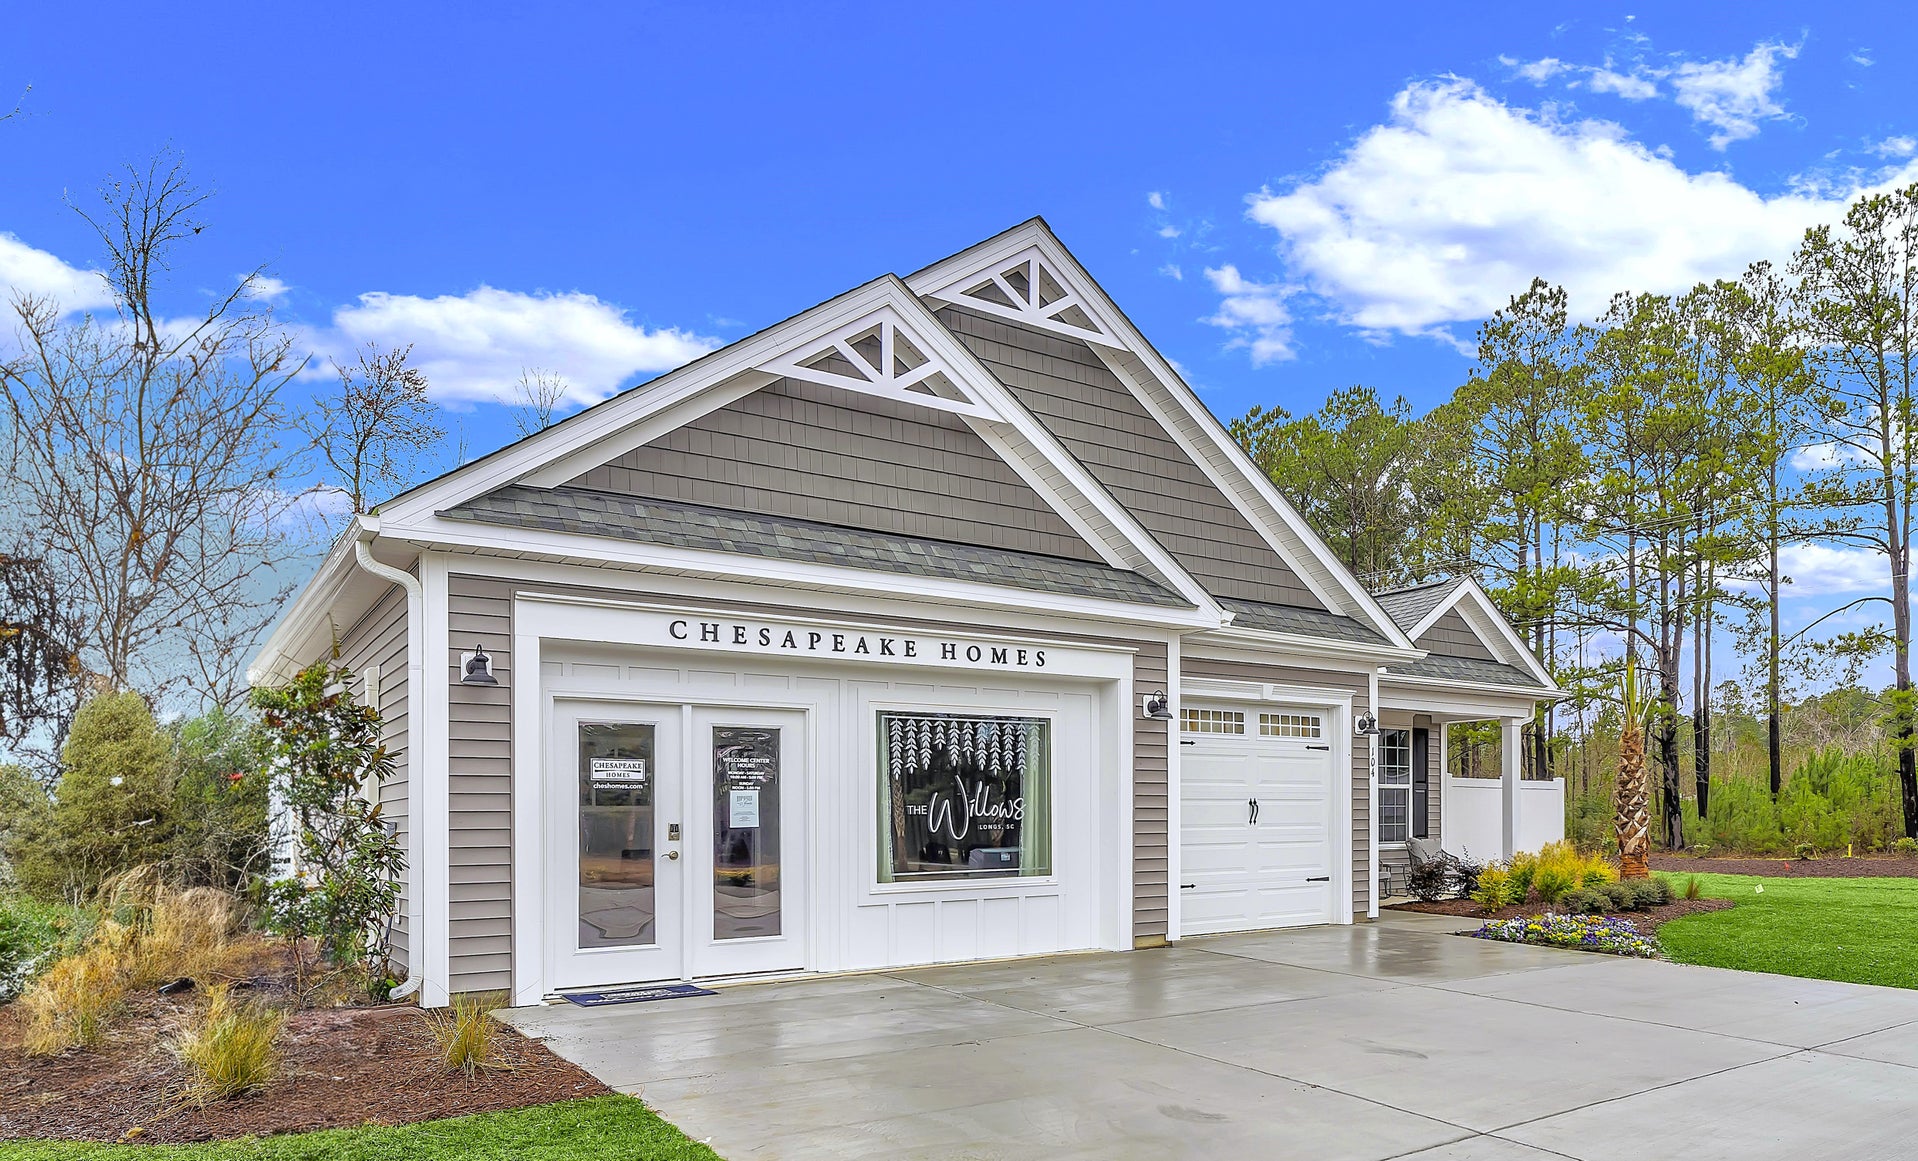 Chesapeake Homes Discover the Serenity of The Willows: A New Community From Chesapeake Homes